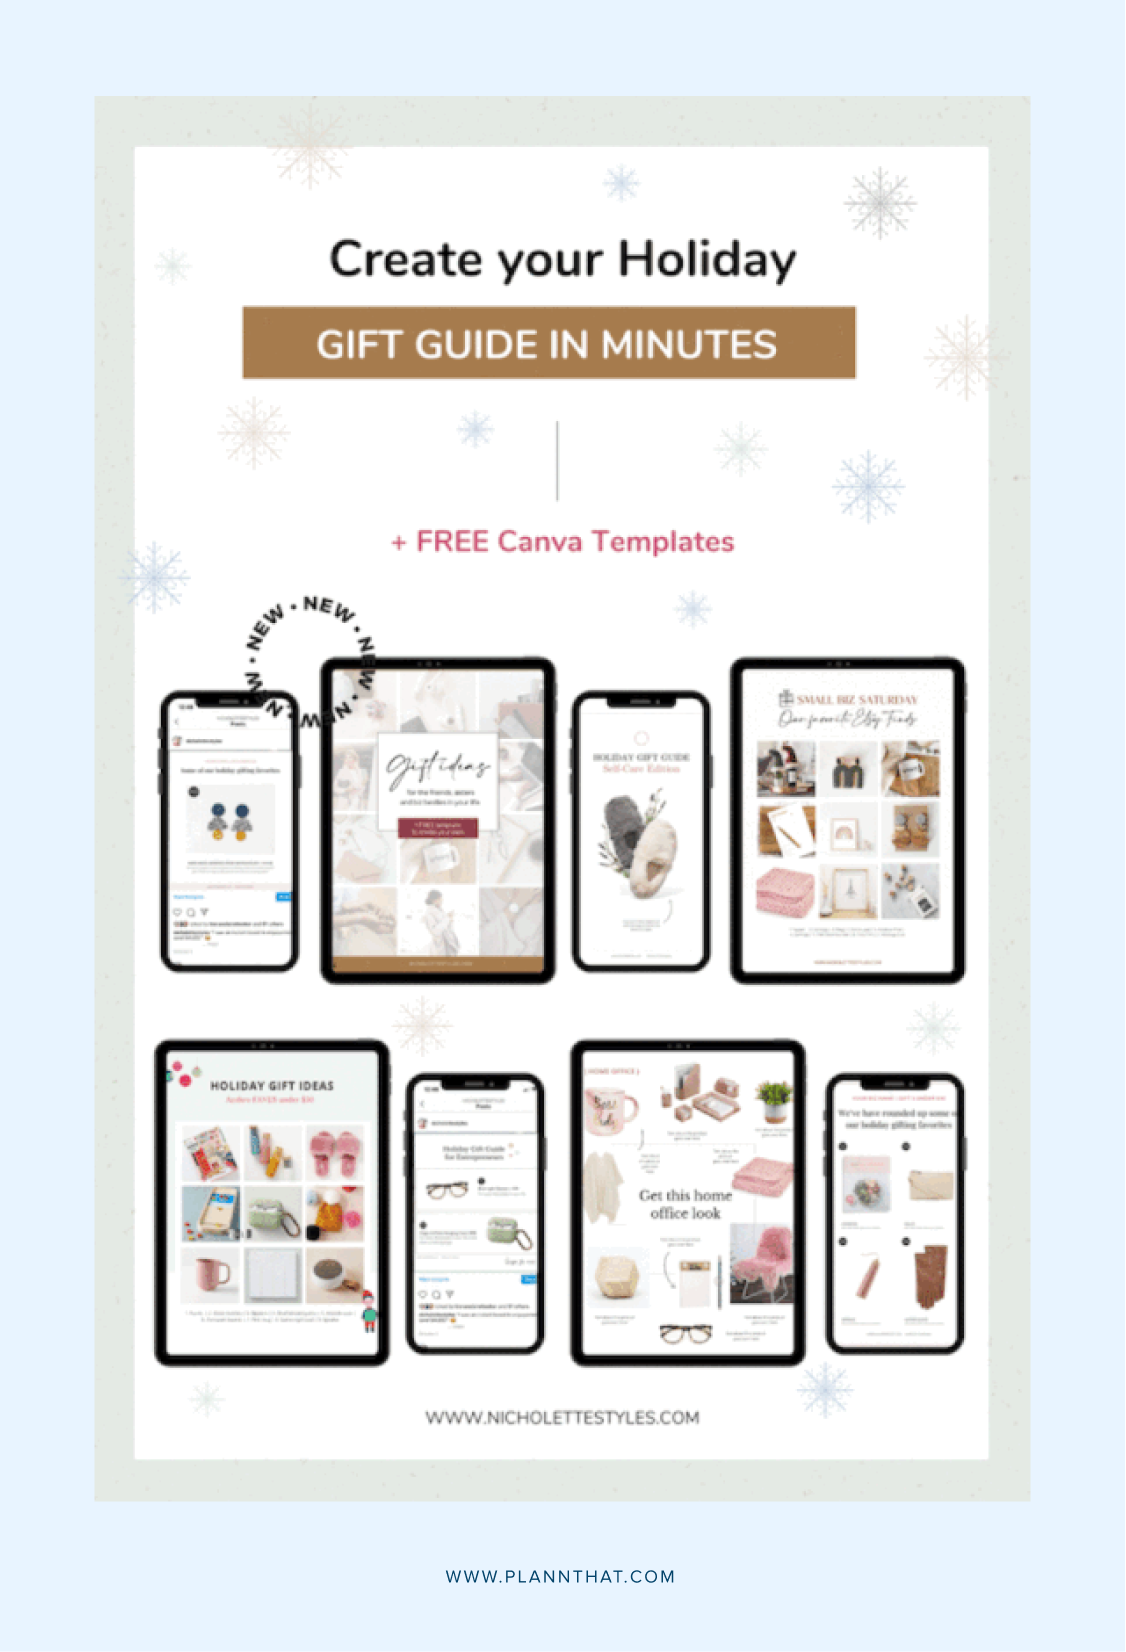 How To Create A Holidays Gift Guide (That Drives Traffic + Builds Your Brand)